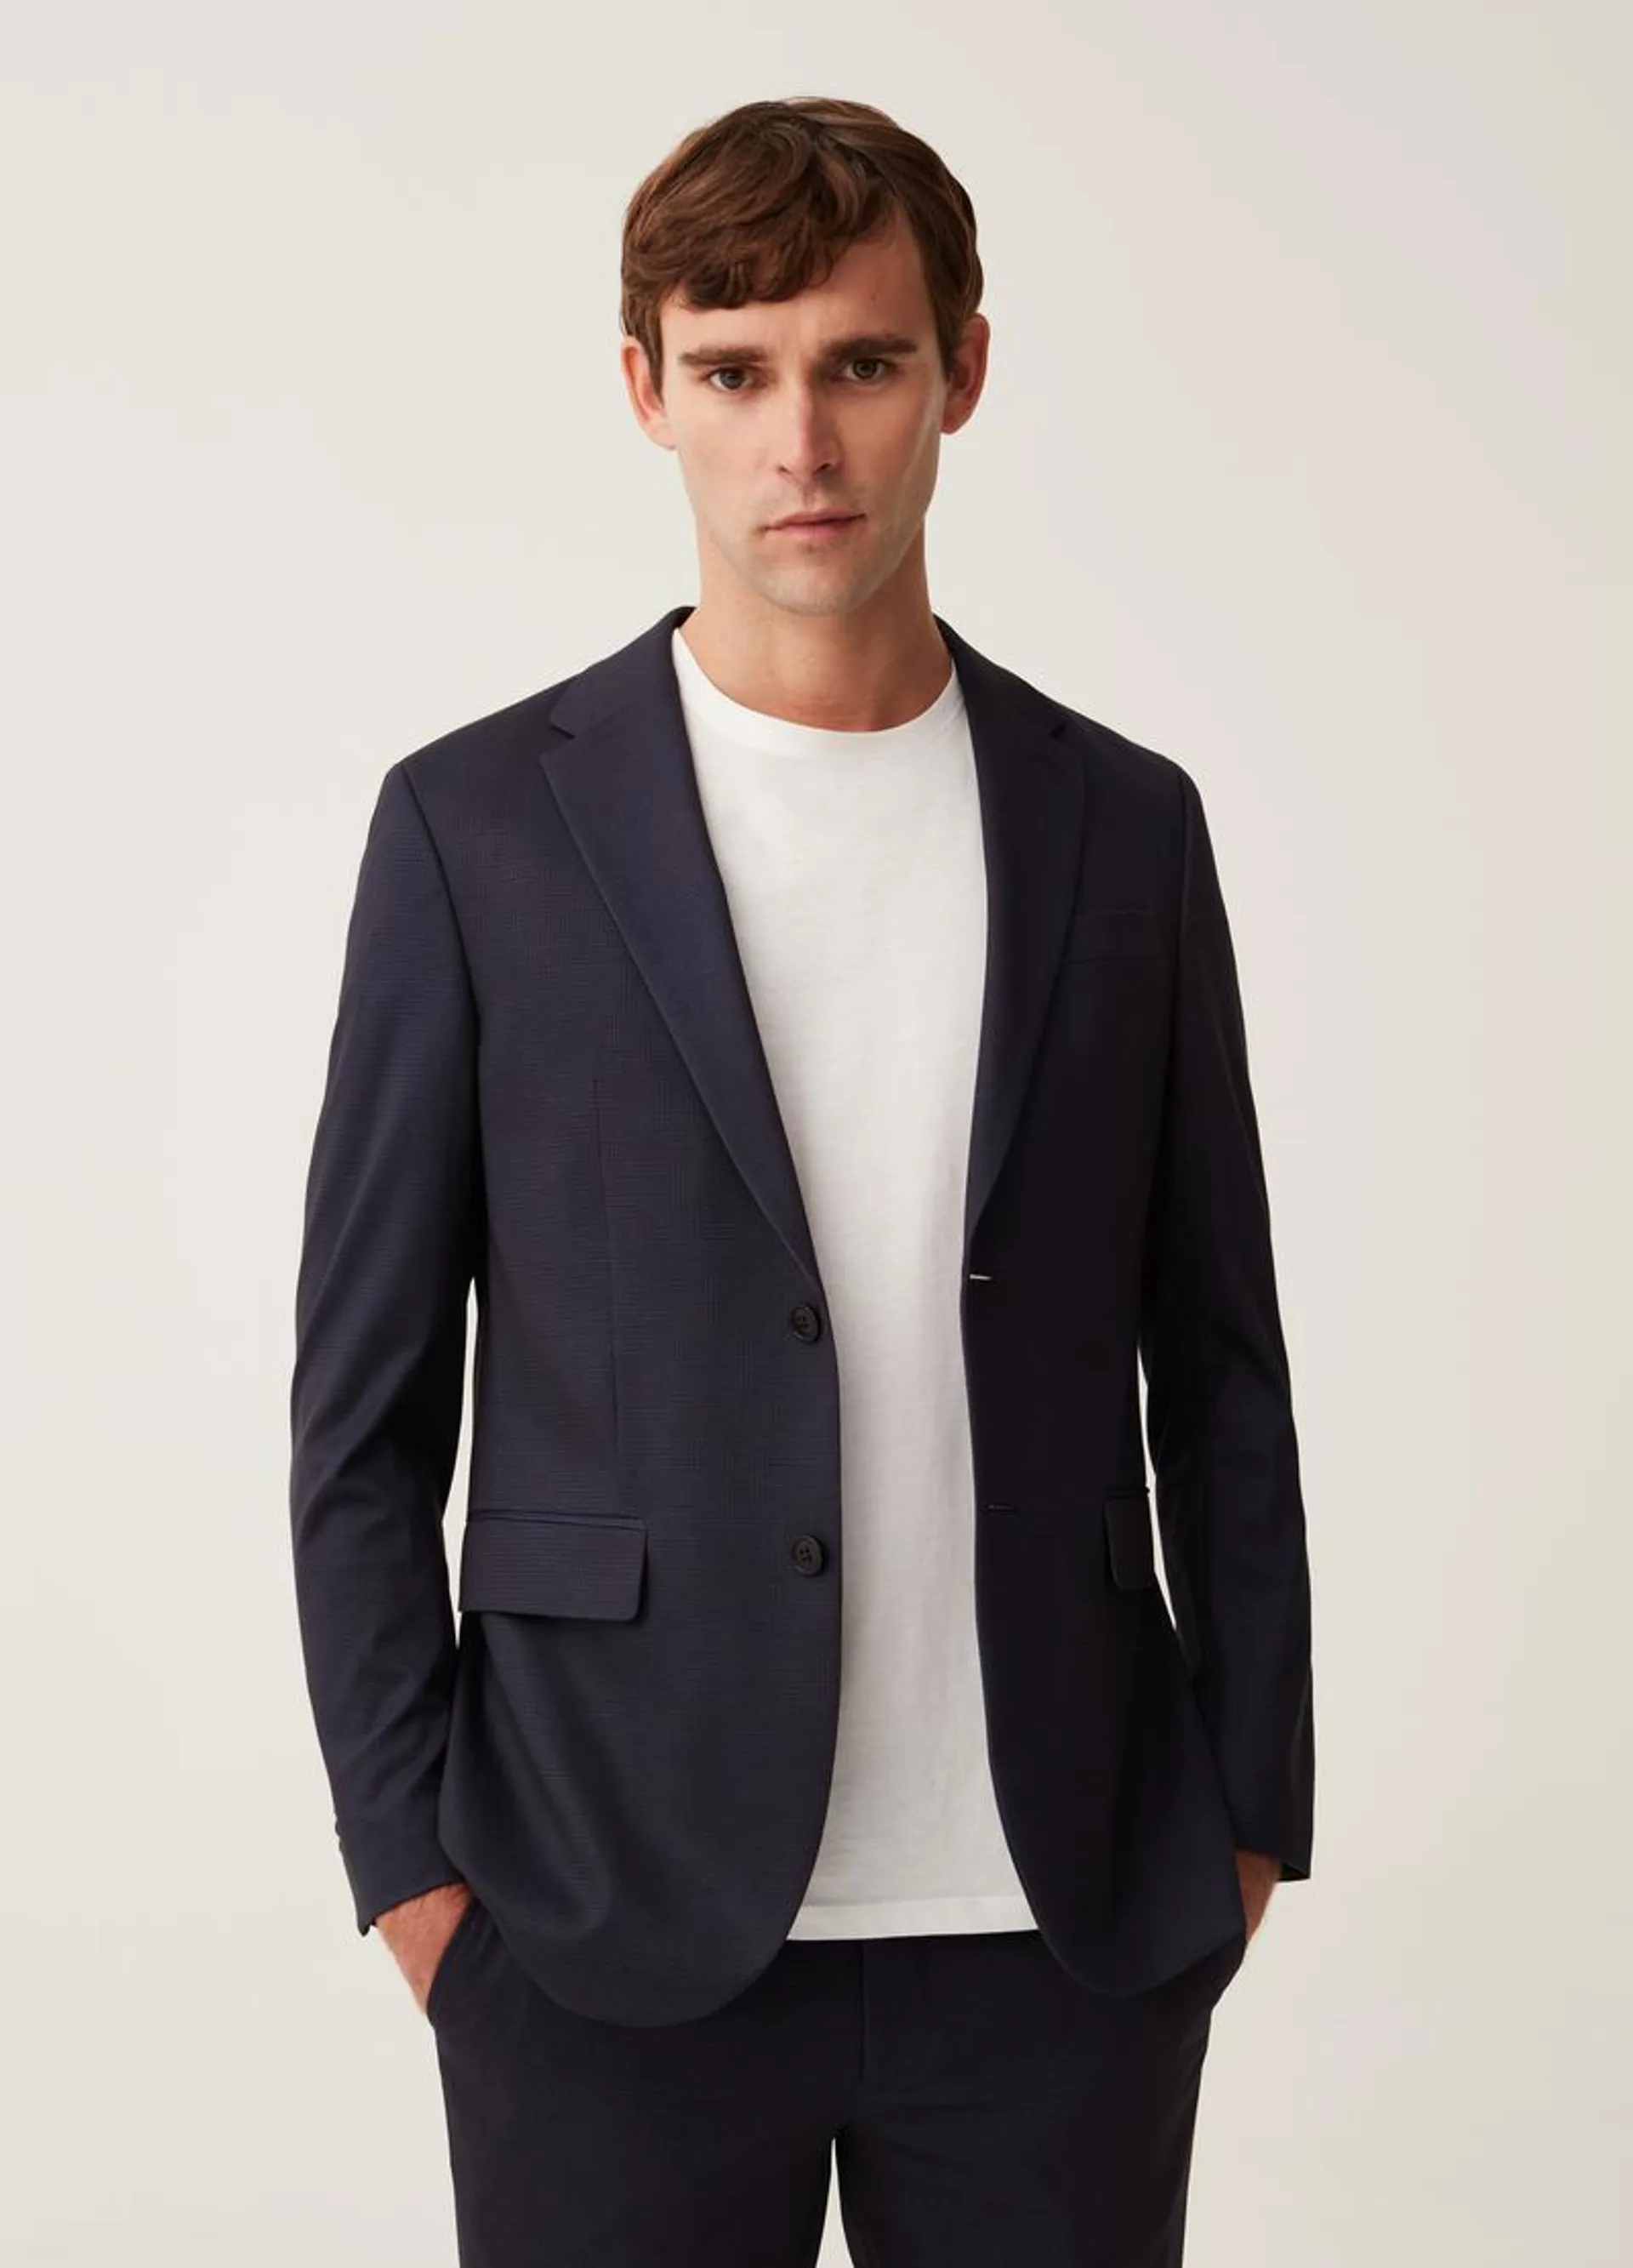 Easy-fit blazer in micro check patterned knit